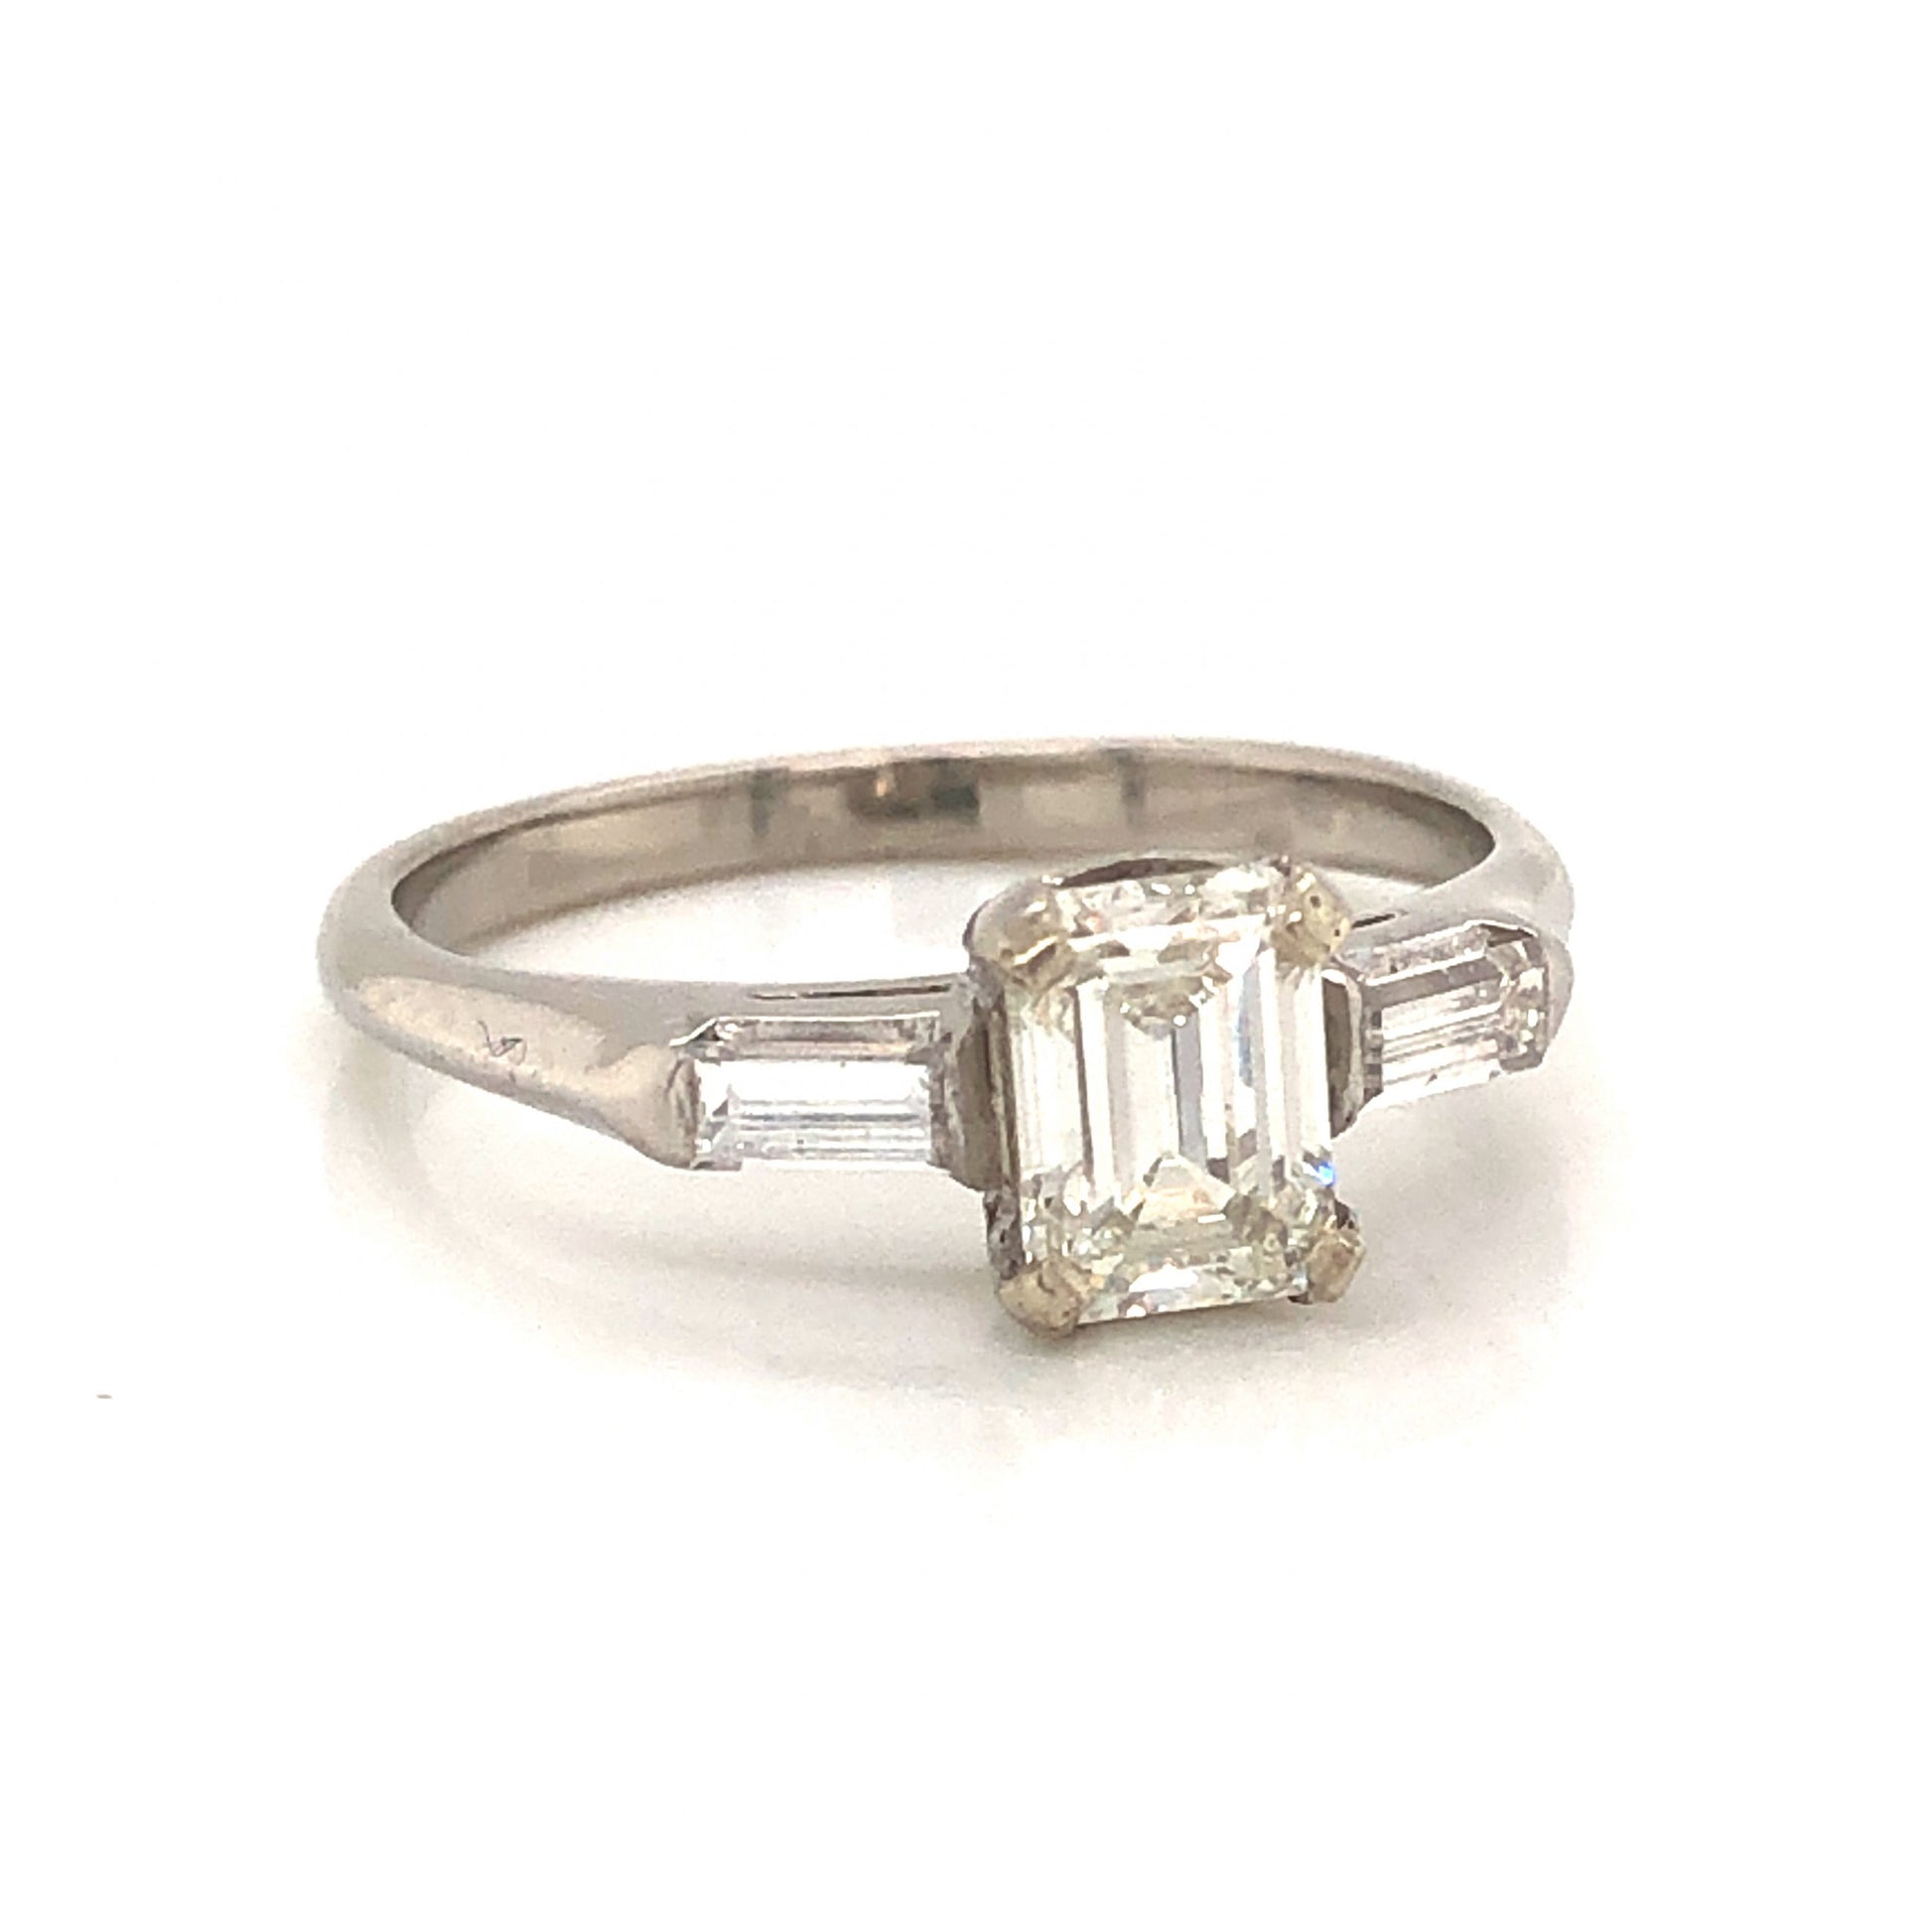 Vintage .63 Emerald Cut Diamond Engagement Ring in PlatinumComposition: PlatinumRing Size: 5.5Total Diamond Weight: .93 ctTotal Gram Weight: 3.5 gInscription: 90